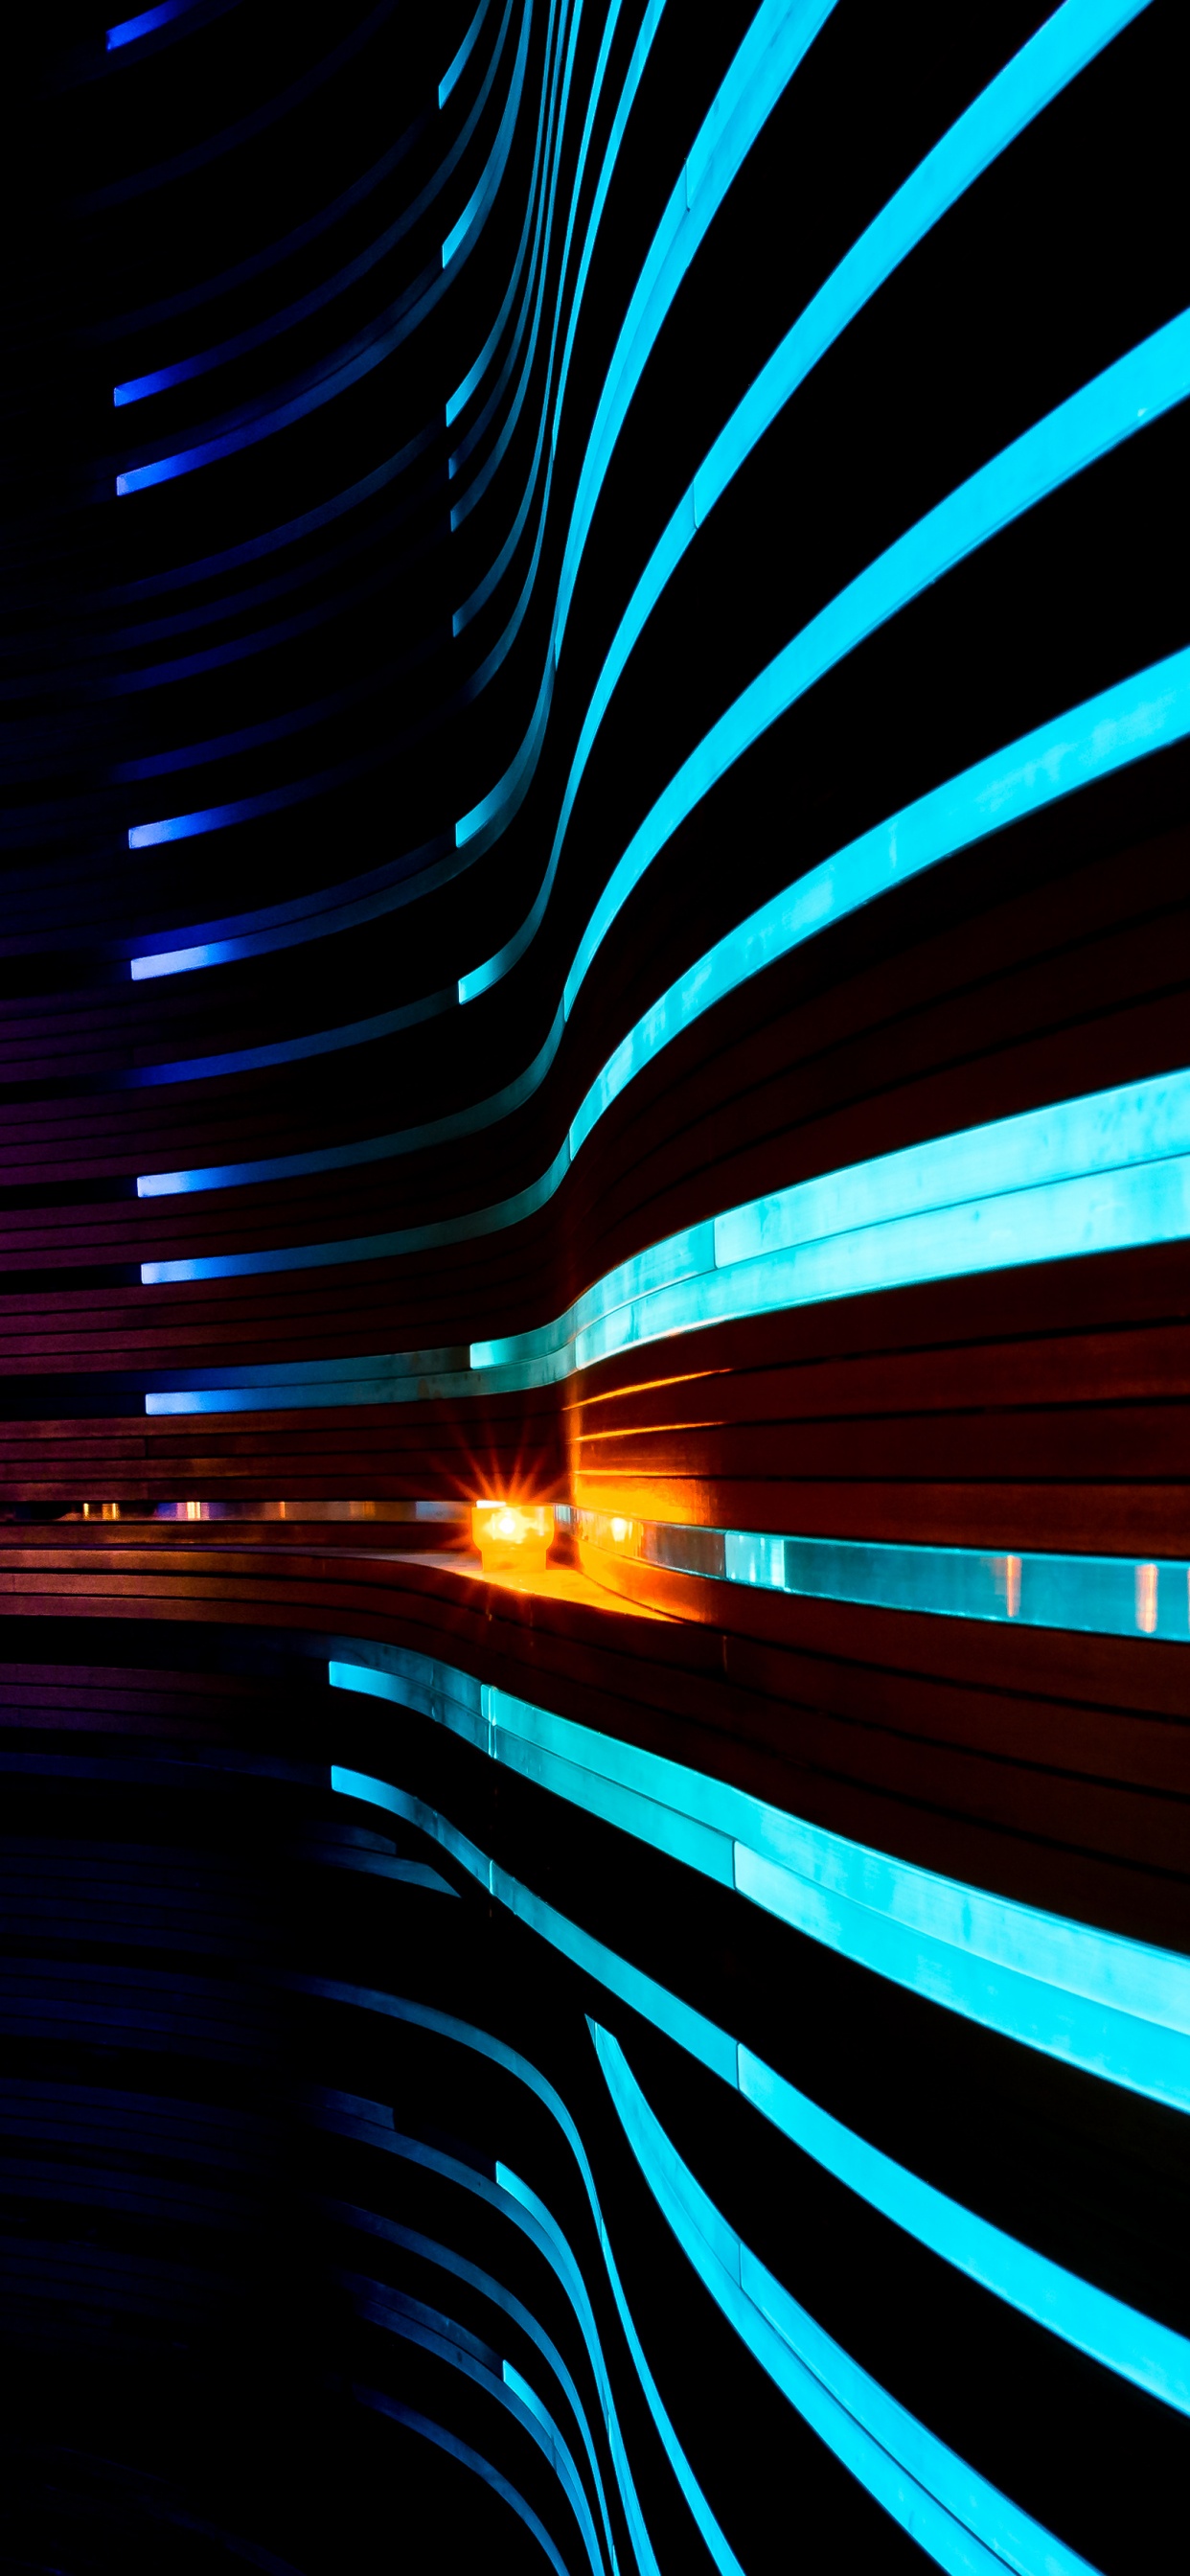 Blue and Black Light in Tunnel. Wallpaper in 1242x2688 Resolution